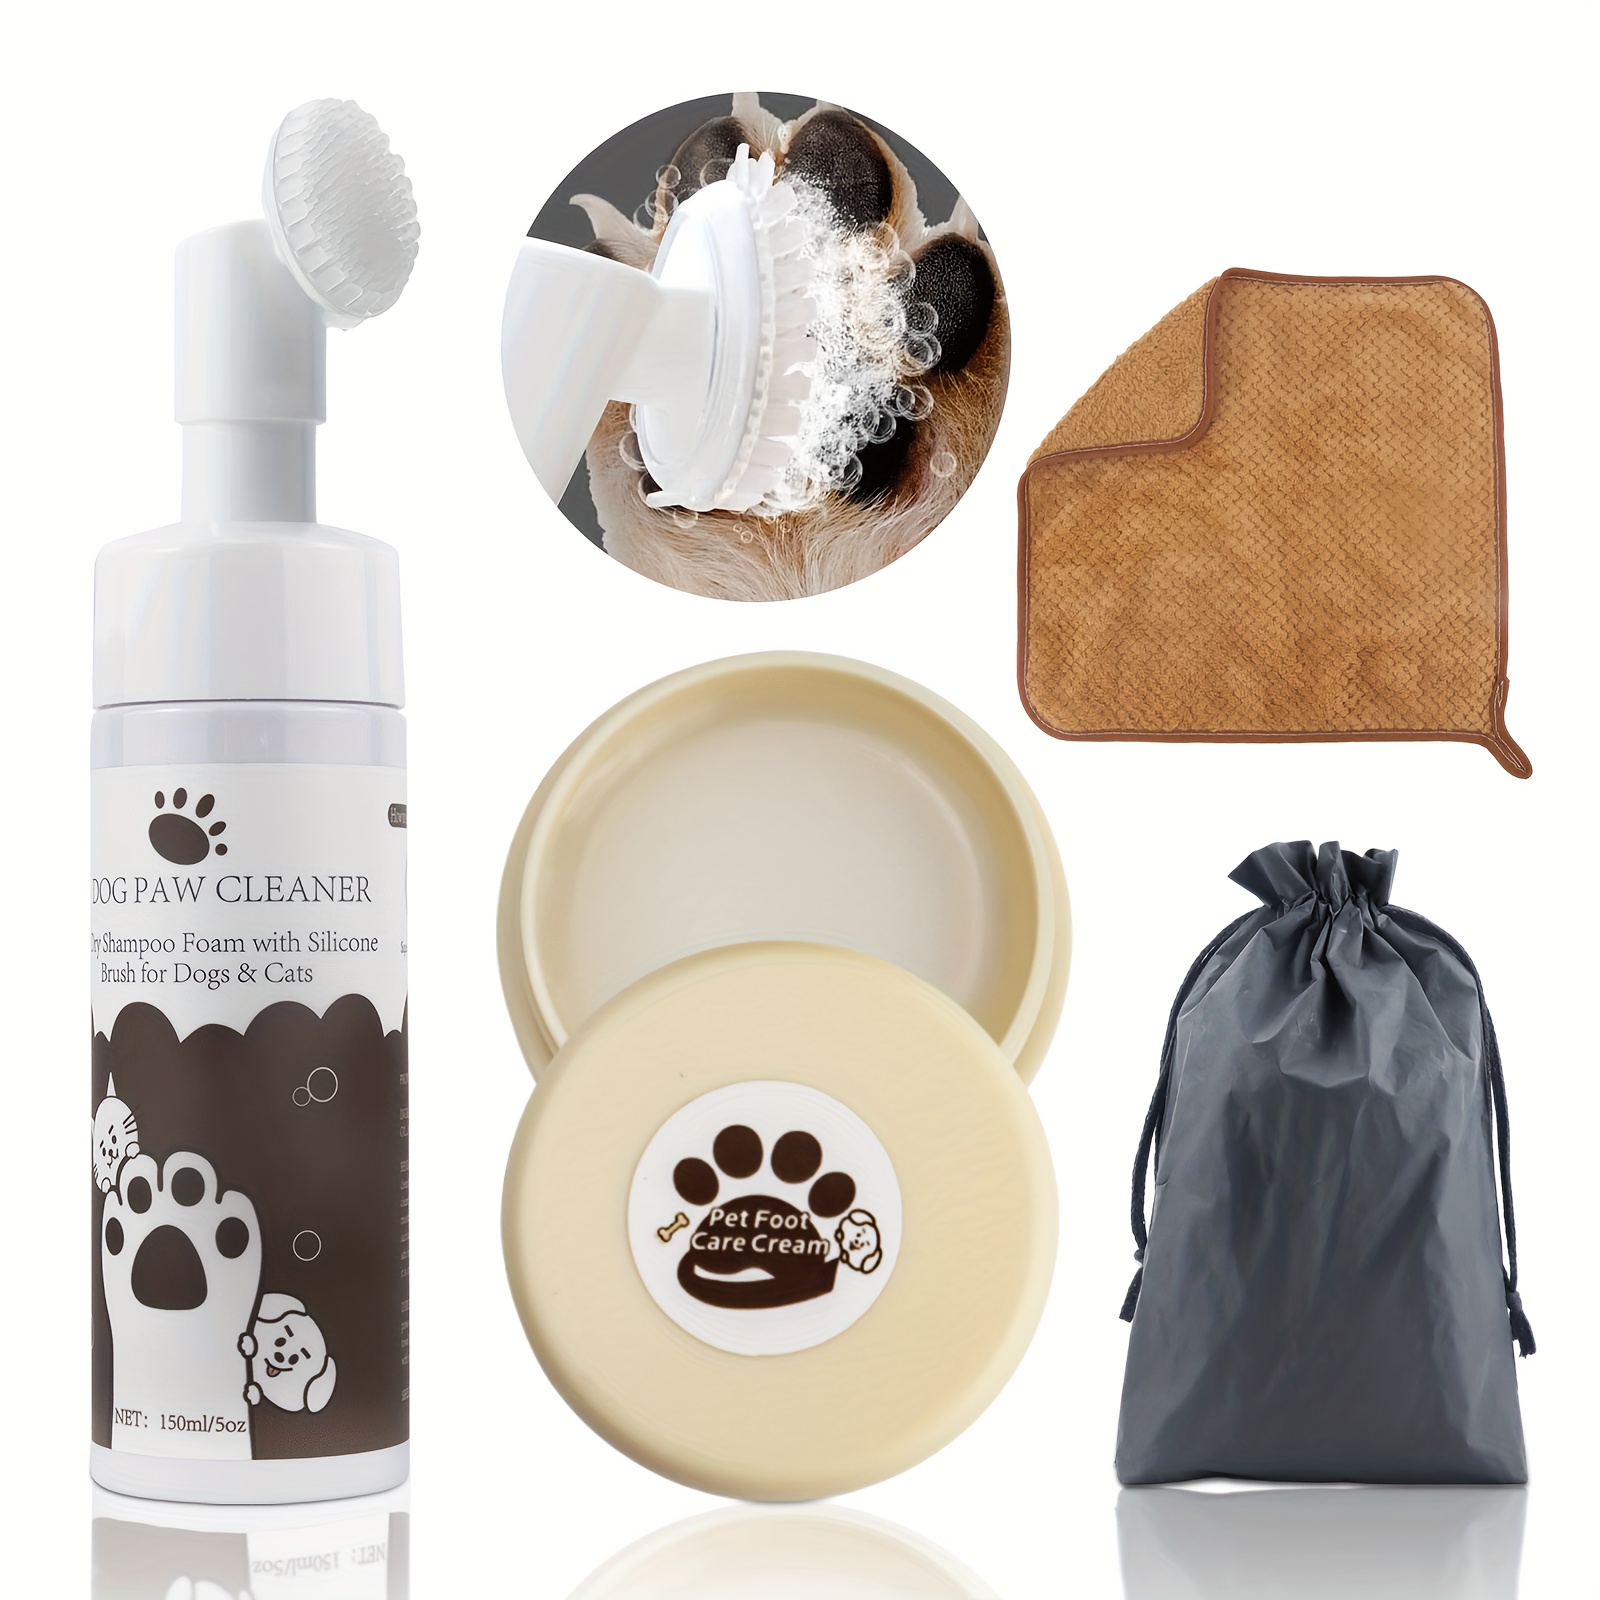 

Dog Paw Care Kit - Gentle Foaming Cleanser For All-around Paw Cleaning - Dog Paw Pad Balm For Soothing Dry Paws & Noses - Paw Cleaner Kit For Dogs And Cats